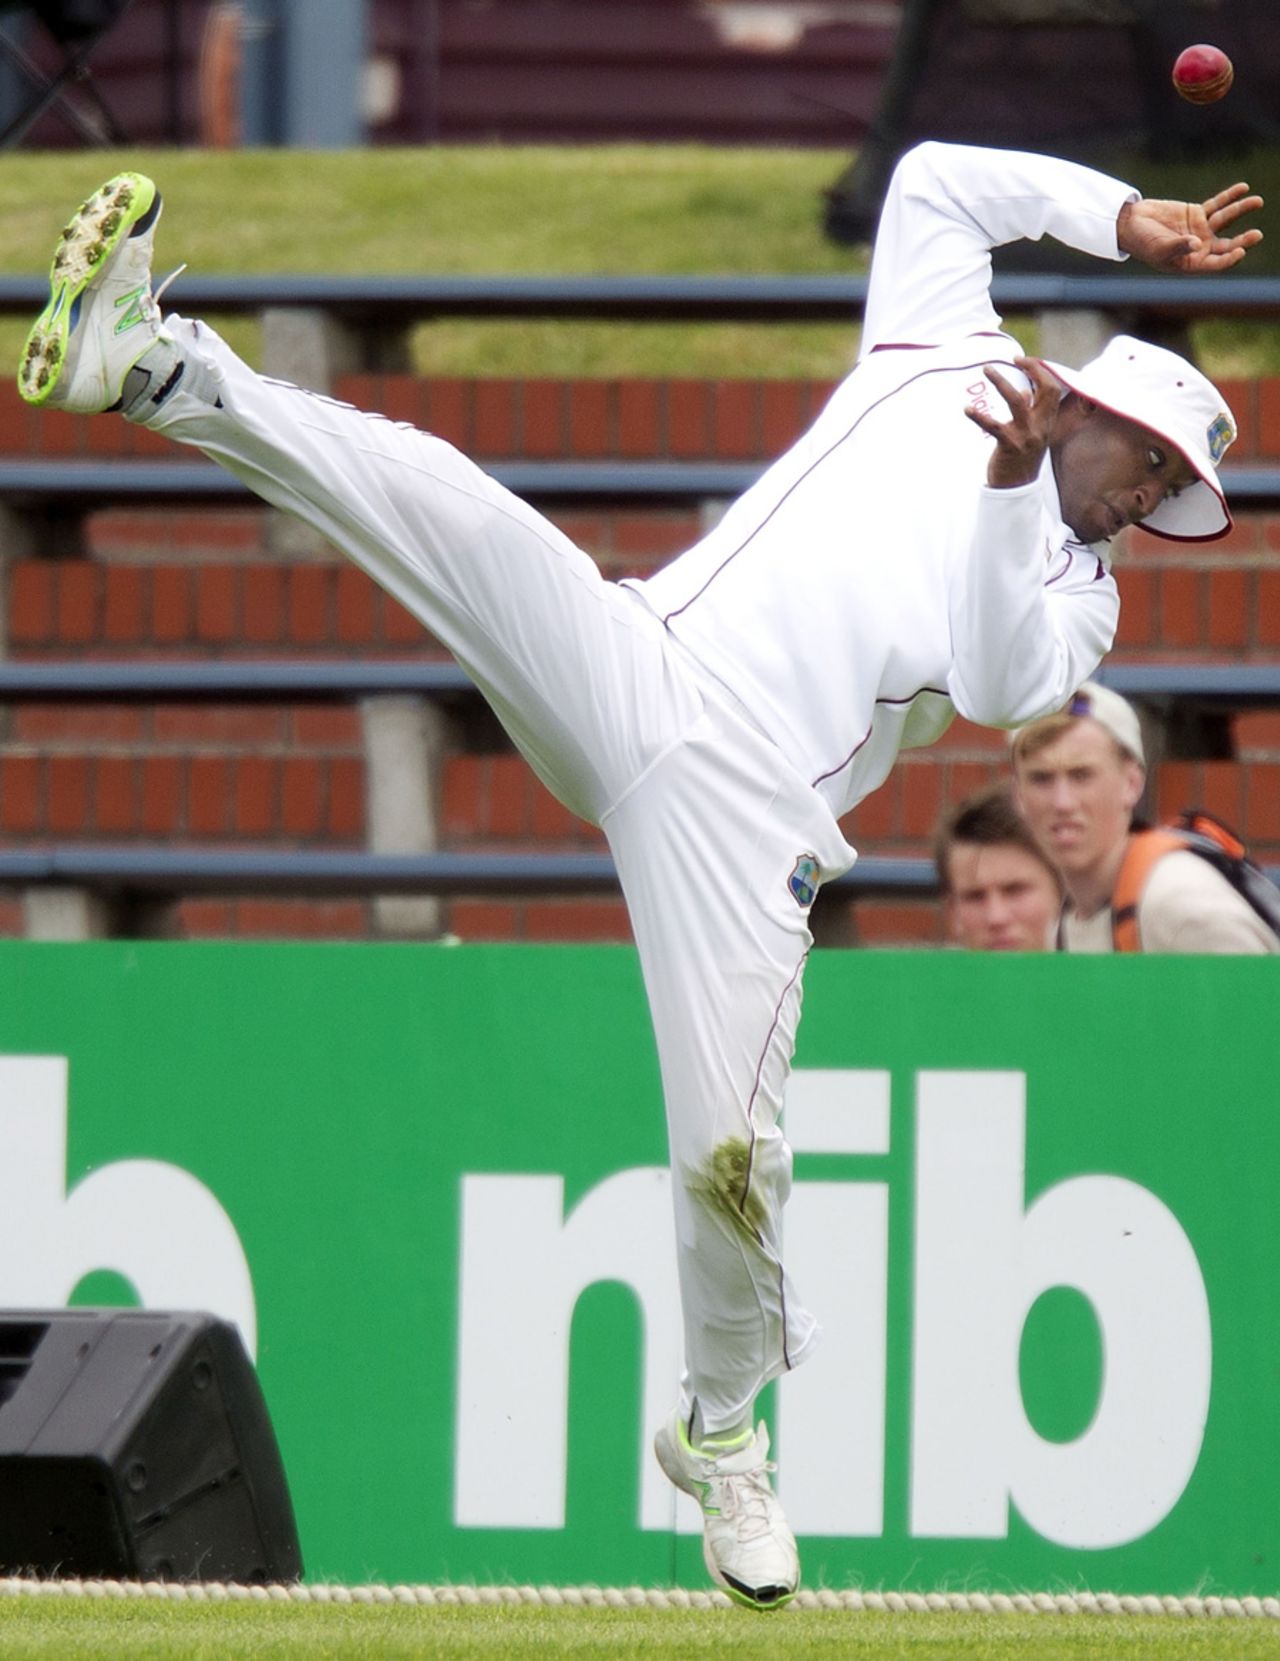 Tino Best drops Trent Boult's catch on the boundary, New Zealand v West Indies, 2nd Test, Wellington, 2nd day, December 12, 2013